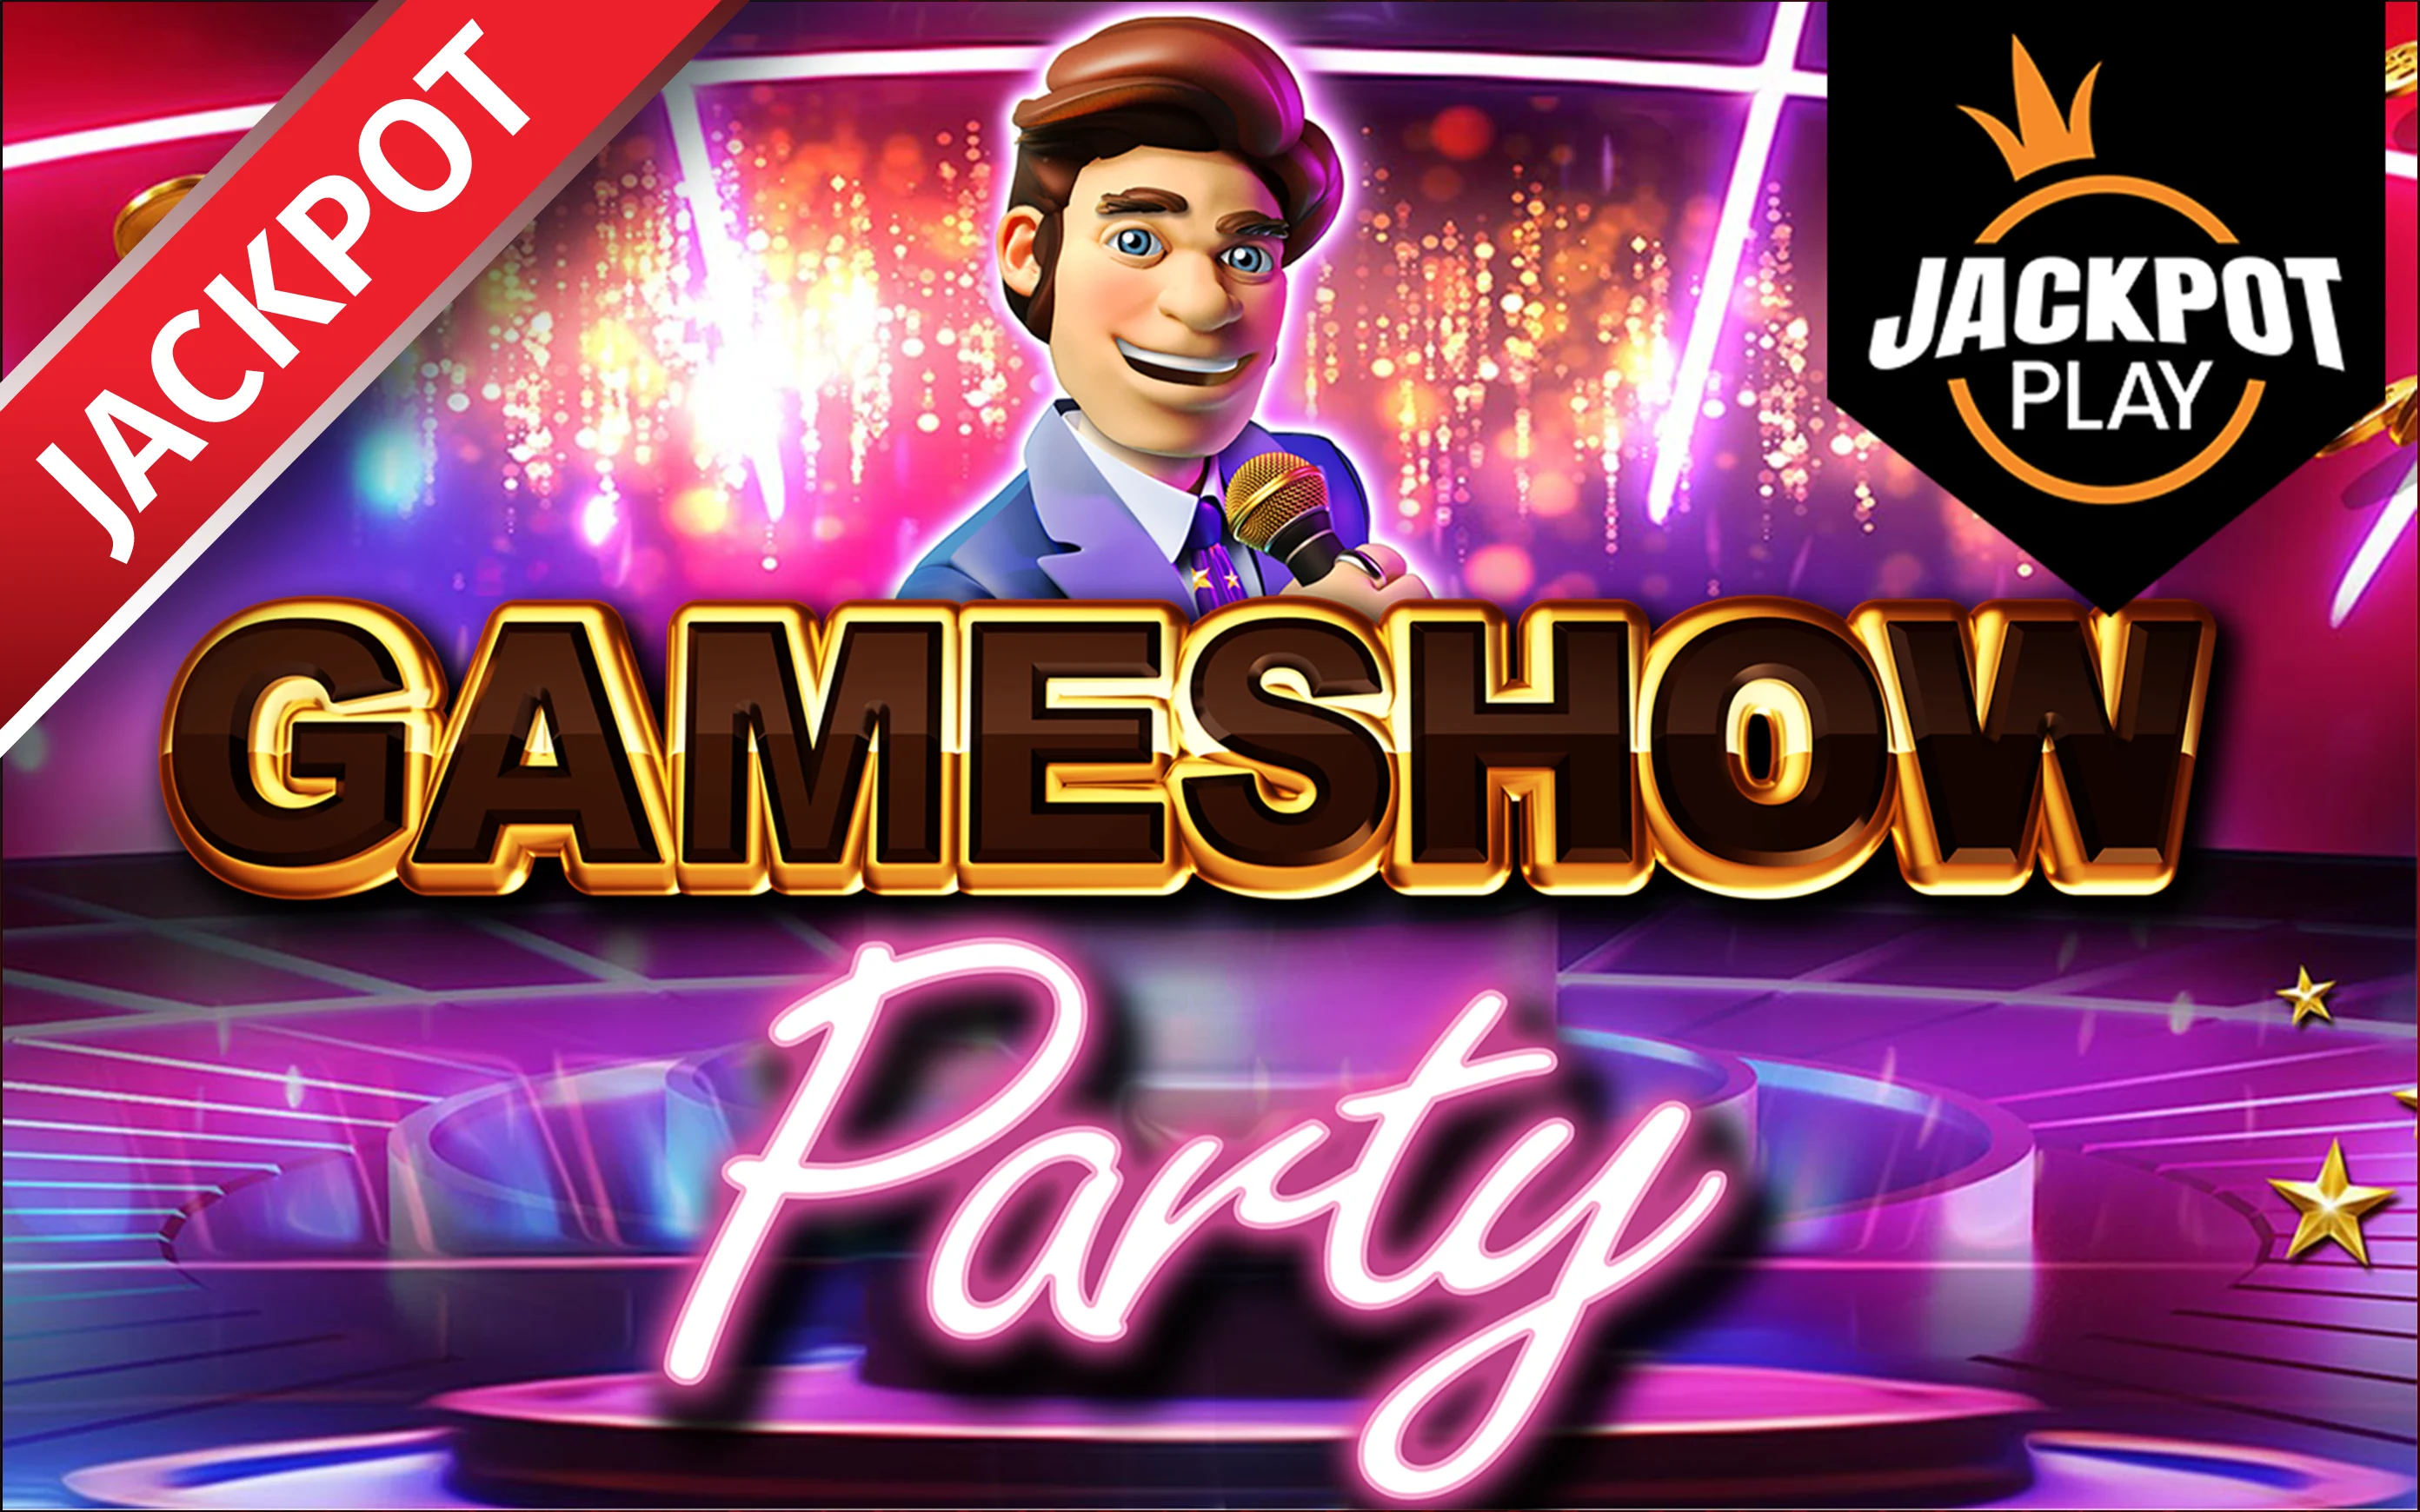 Play Gameshow Party Jackpot Play on Starcasino.be online casino